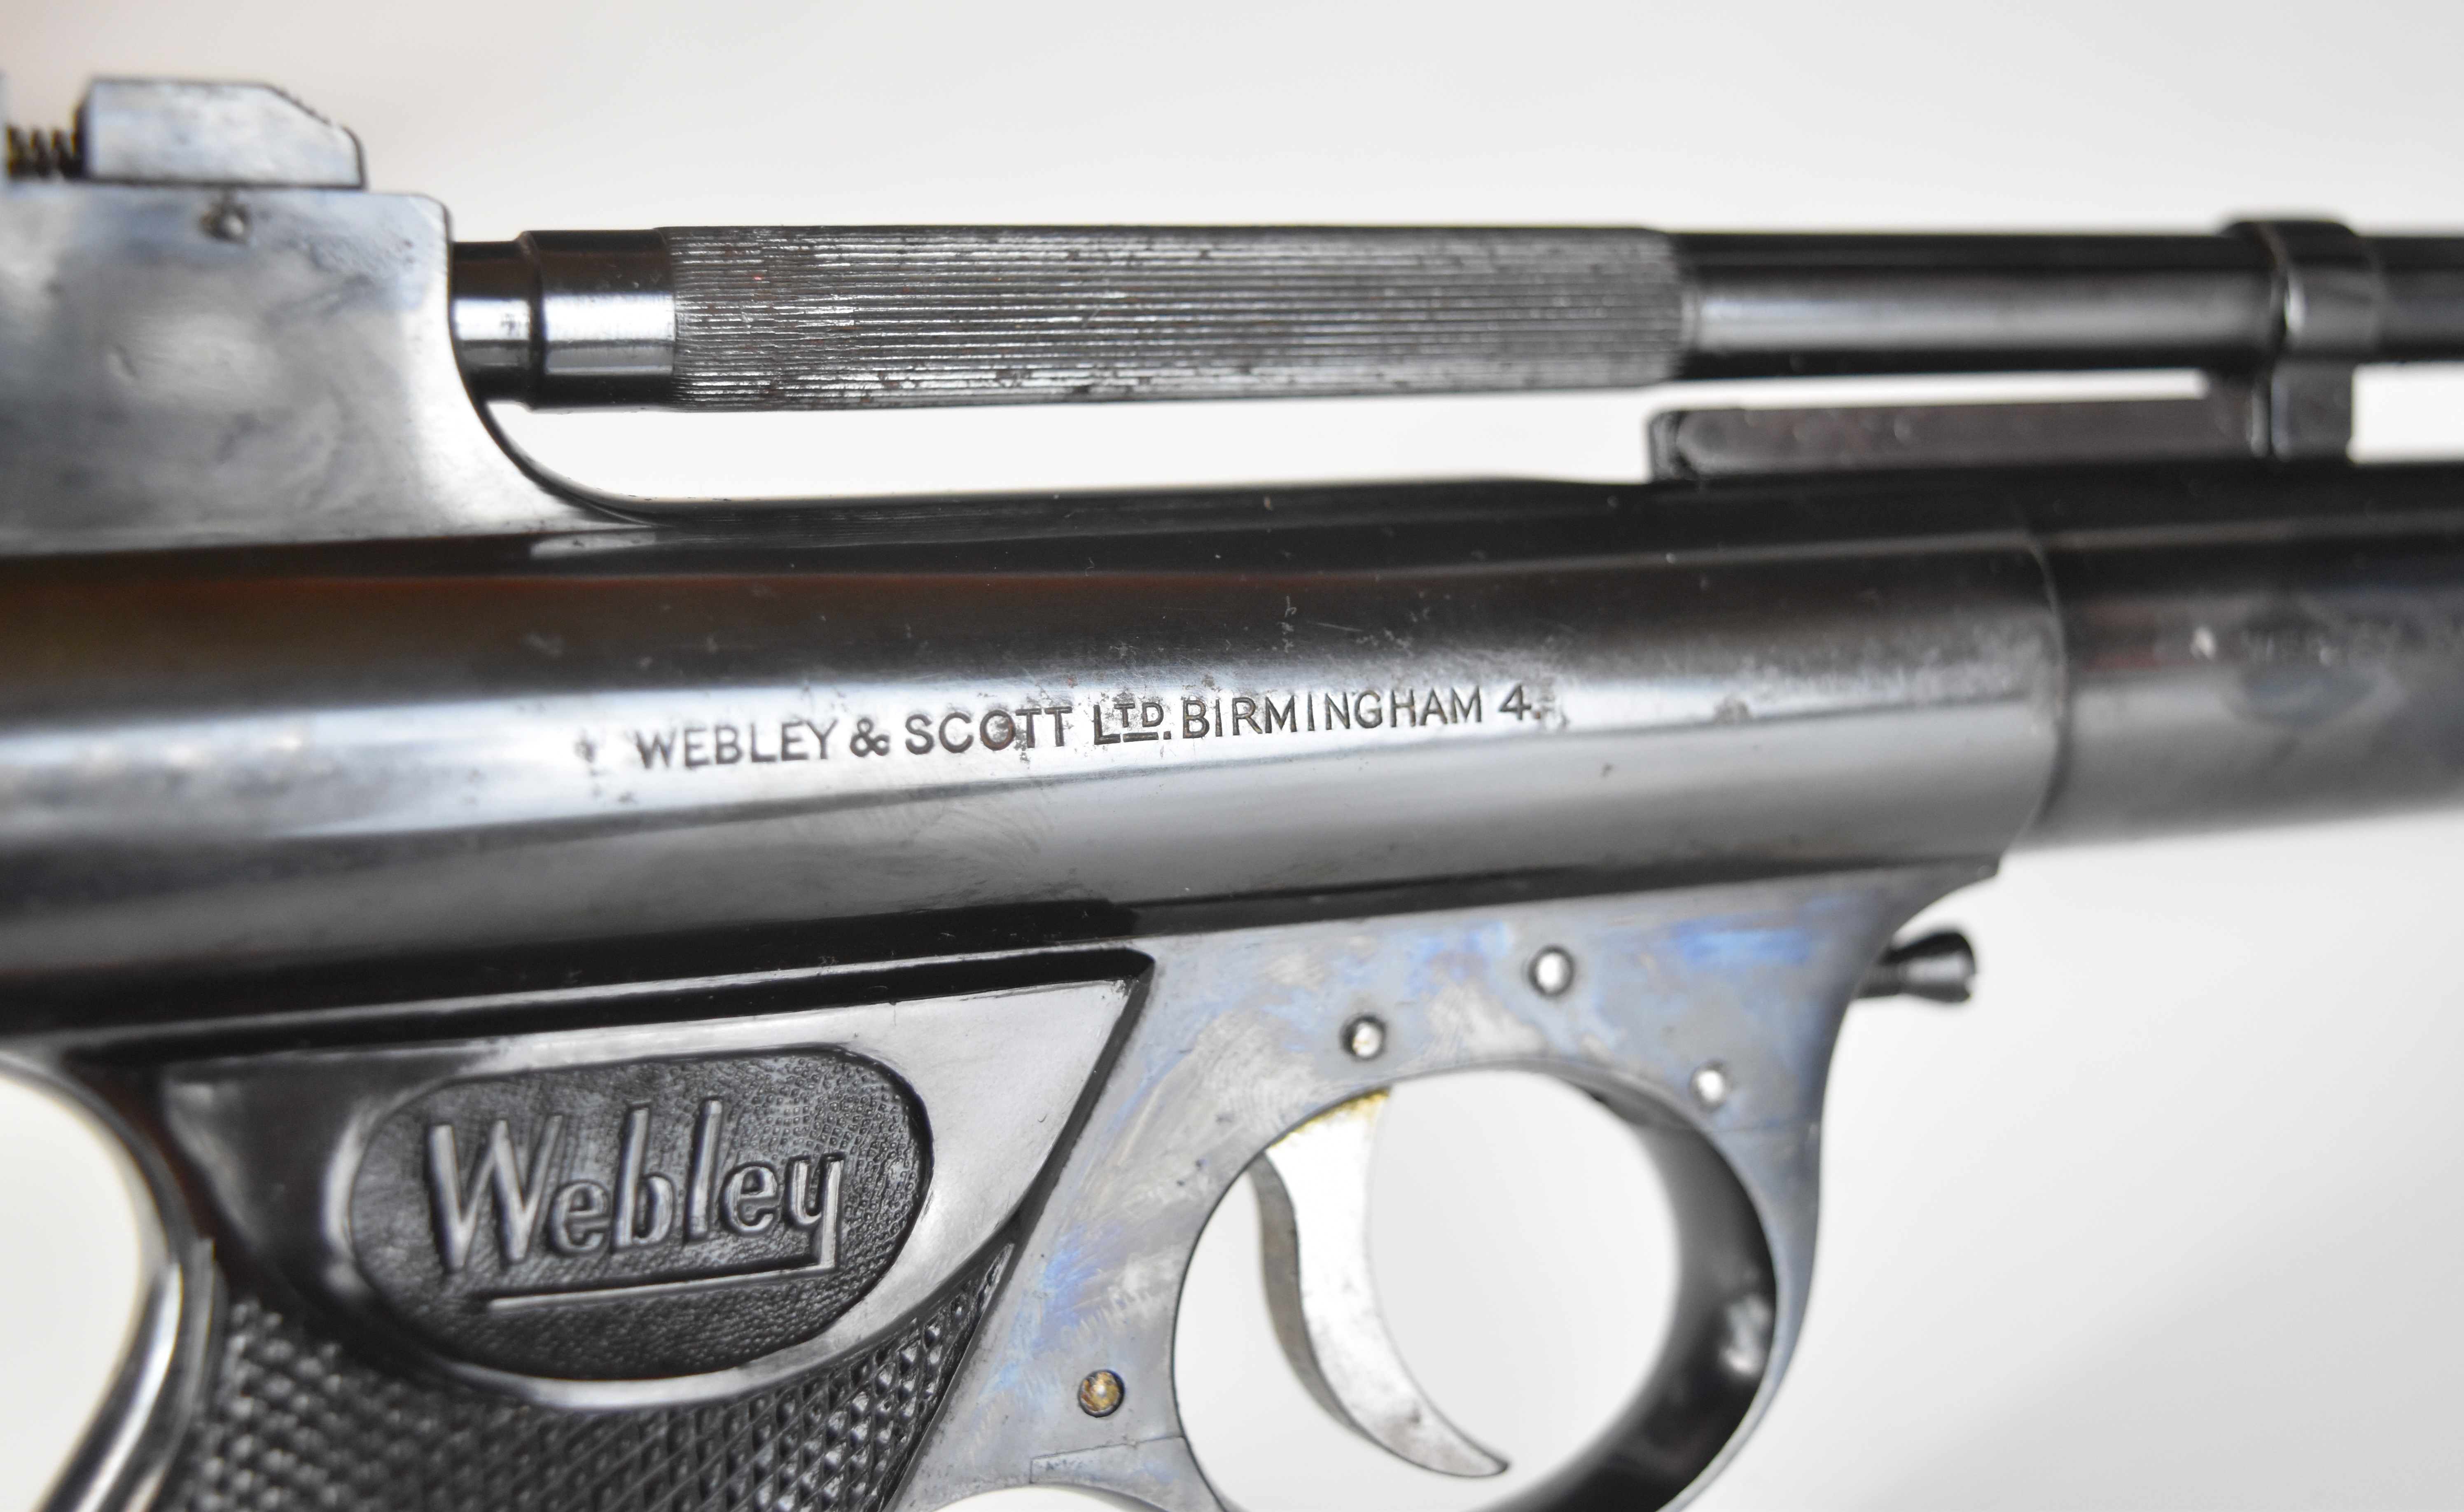 Webley Mark 1 .177 air pistol with named and chequered grips and adjustable sights and trigger, - Image 13 of 15